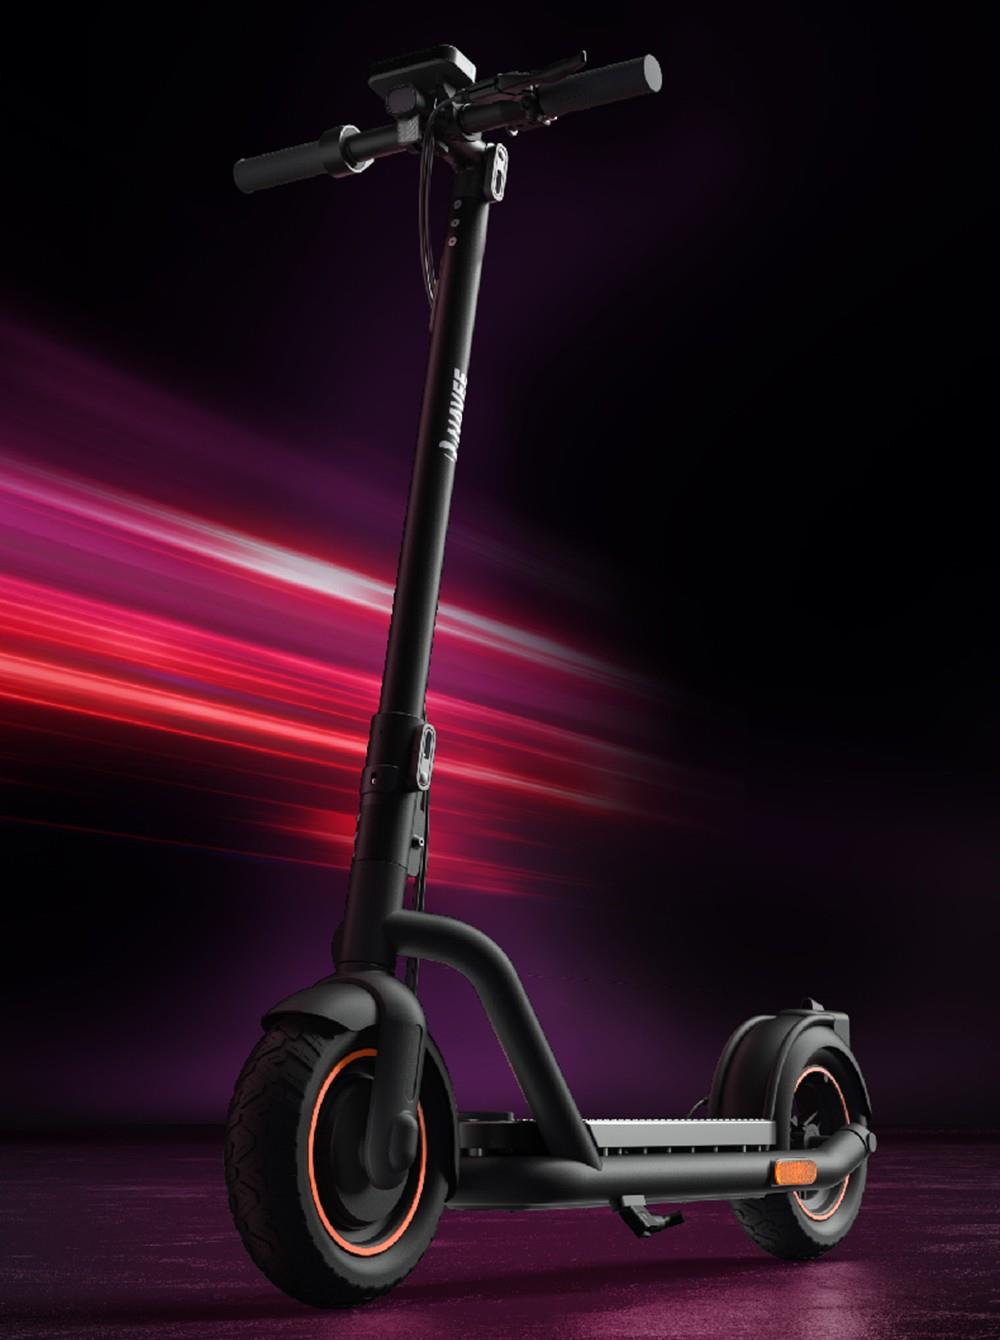 526€ with Coupon for NAVEE N65 10-Inch Folding Electric Scooter 500W Motor - EU 🇪🇺 - GEEKBUYING